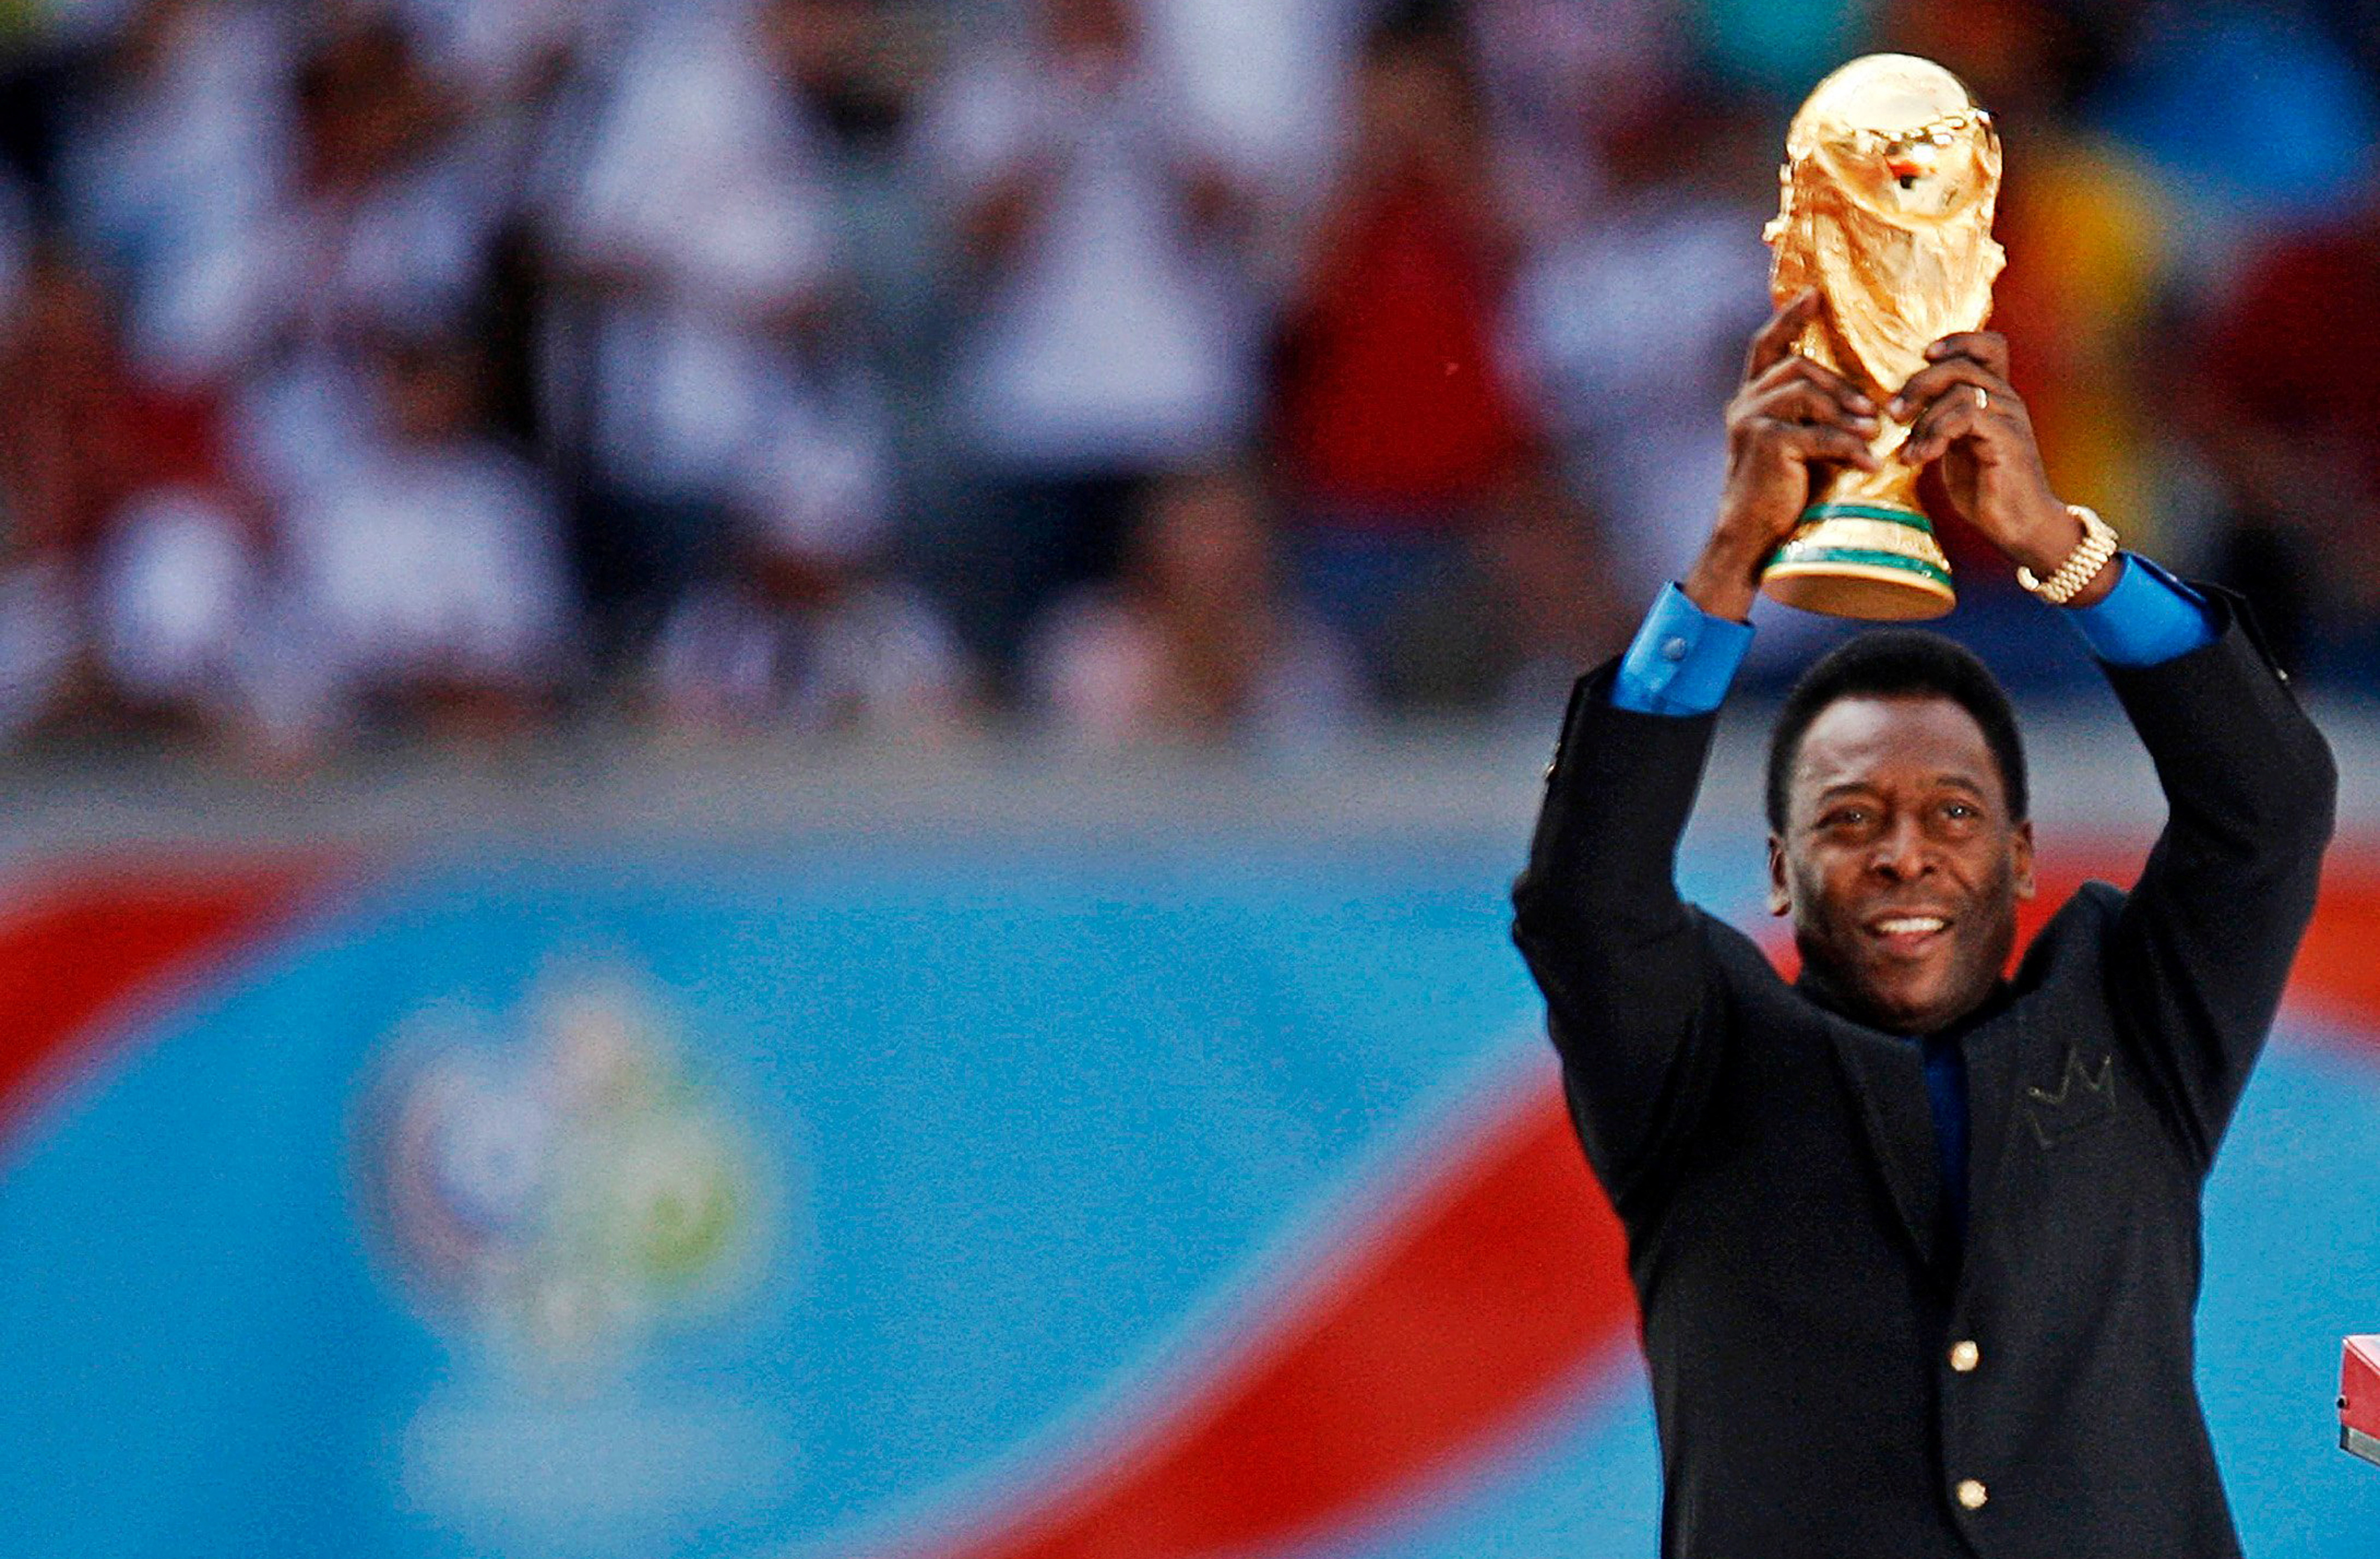 Brazilian football legend Pele holds the World Cup trophy at the opening ceremony of the 2006 World Cup in Munich.